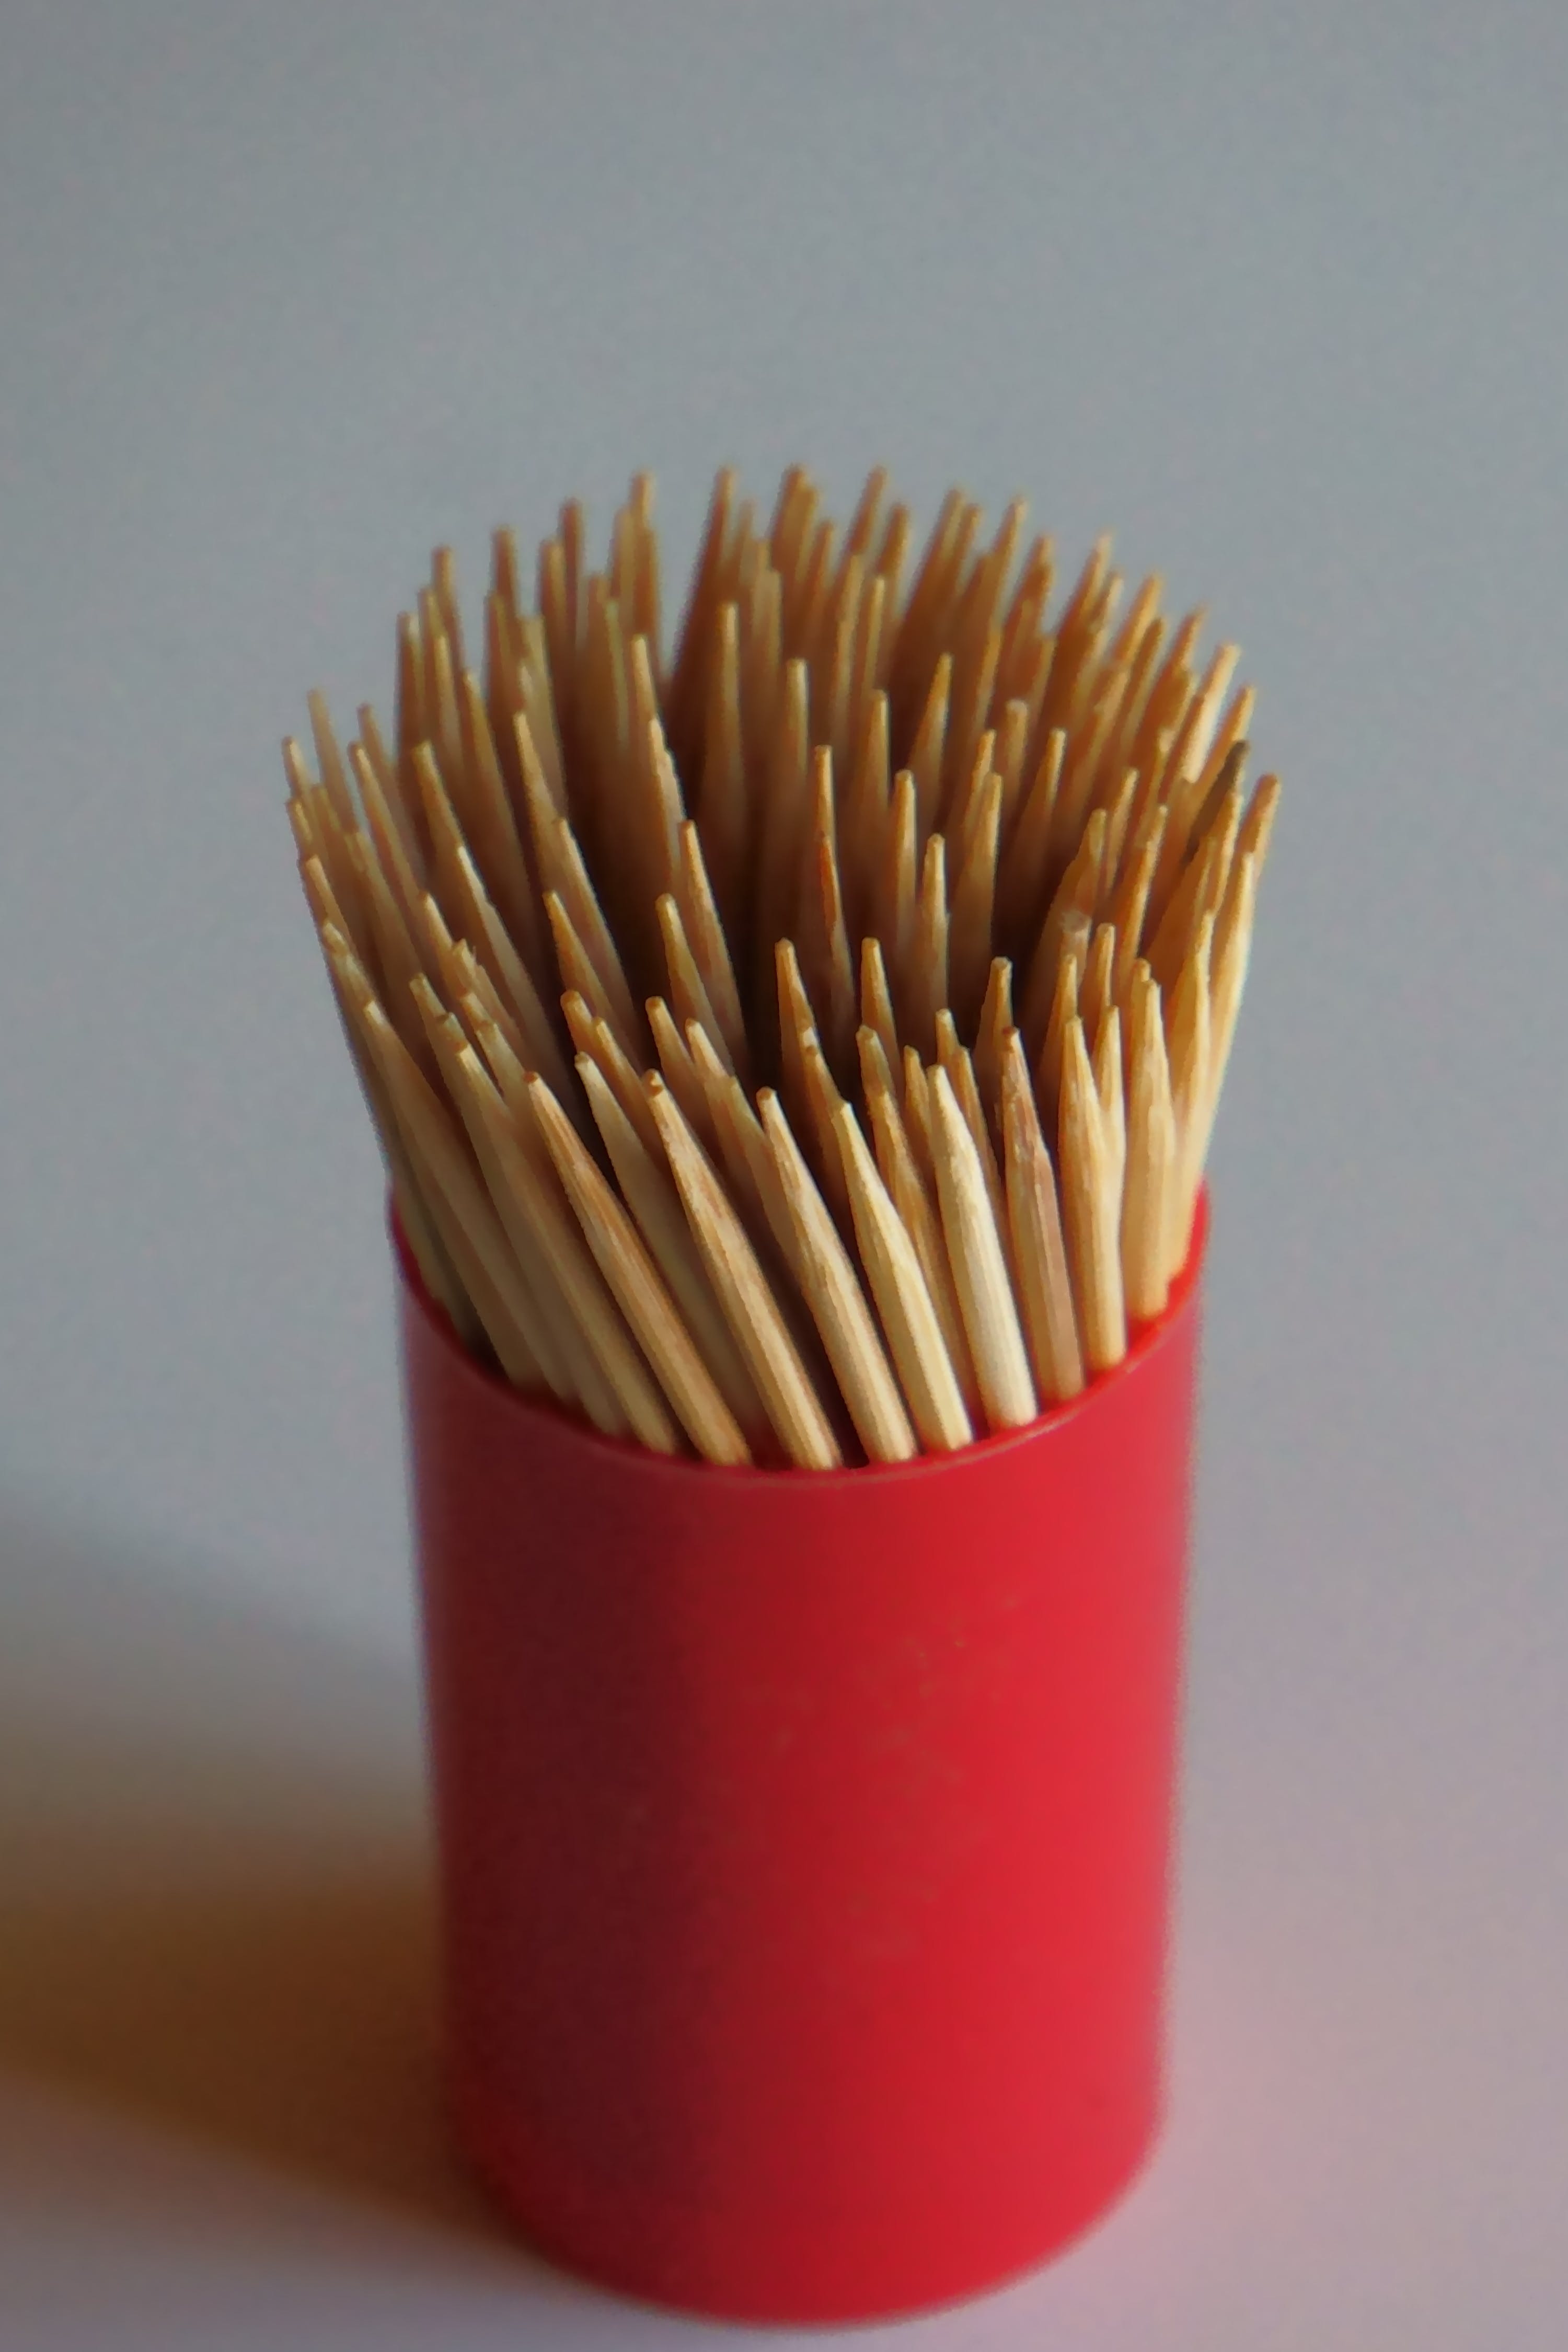 A bunch of toothpicks | Source: Pexels